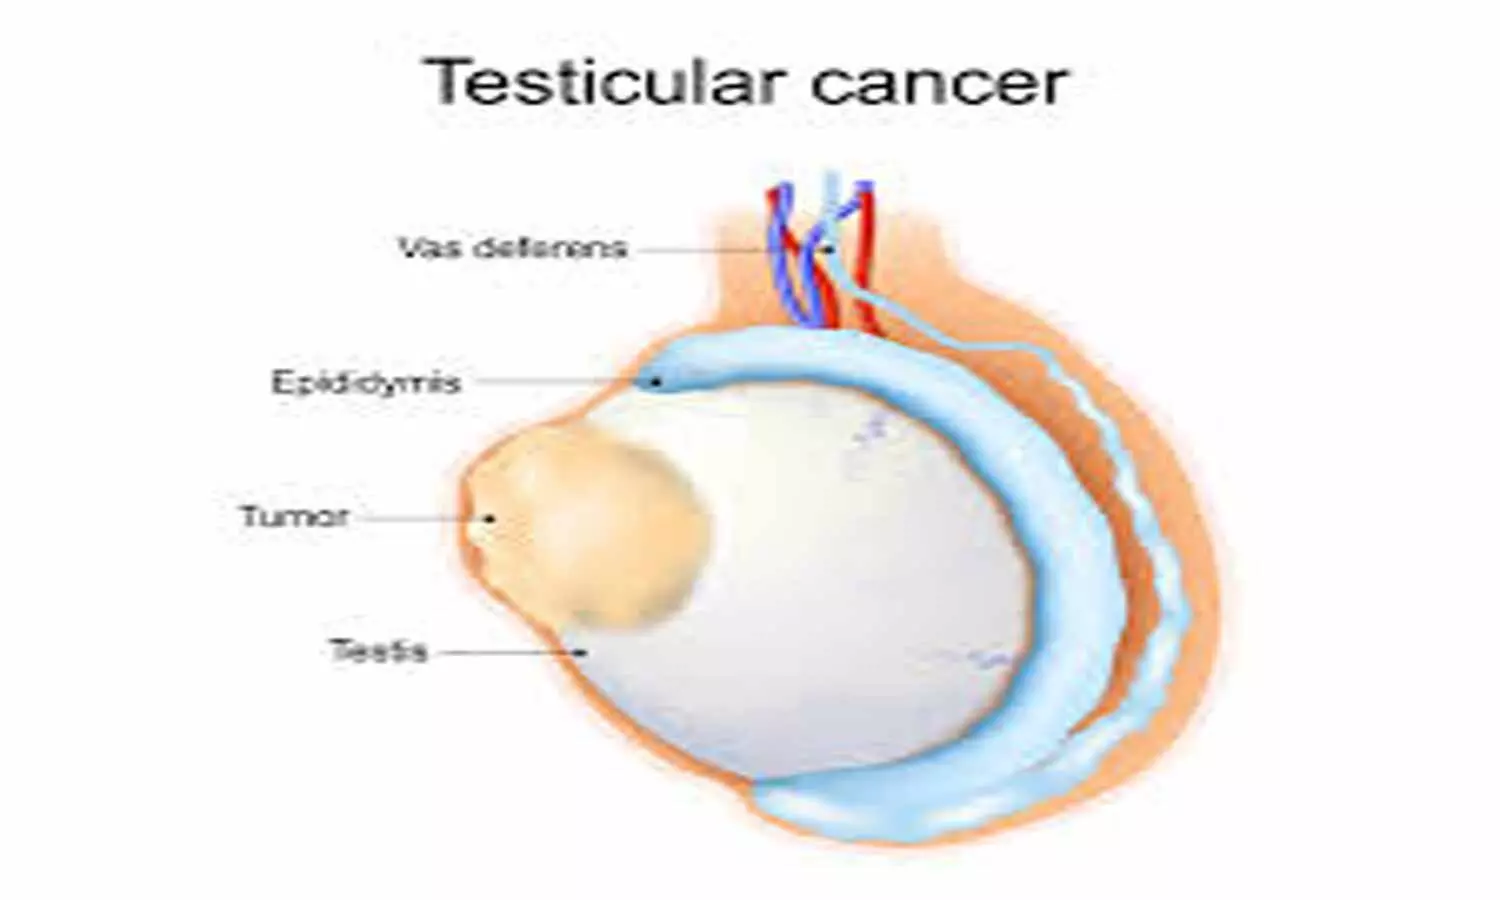 Medical imaging may increase risk of testicular cancer: Study